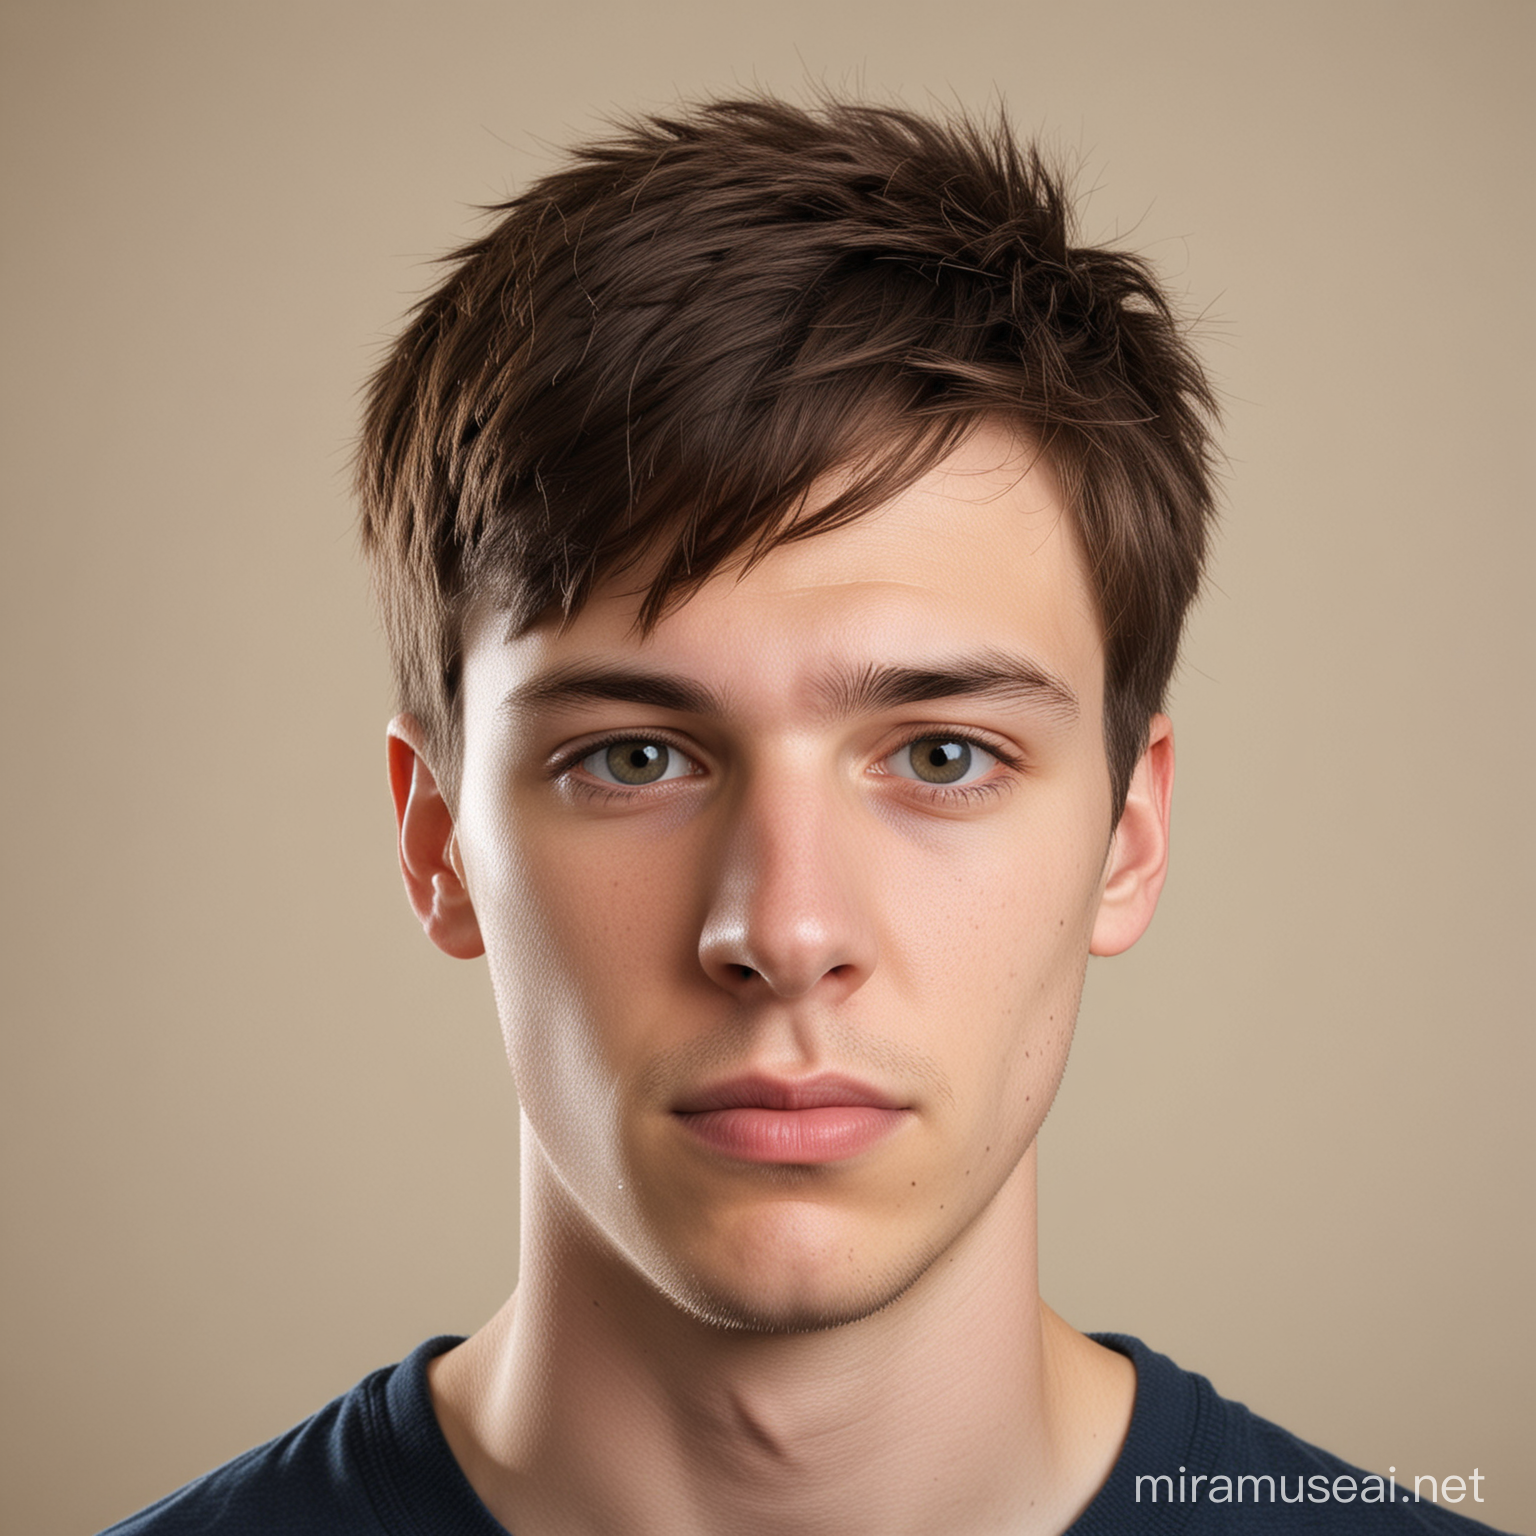 Portrait of a Young Man with Aspergers Syndrome